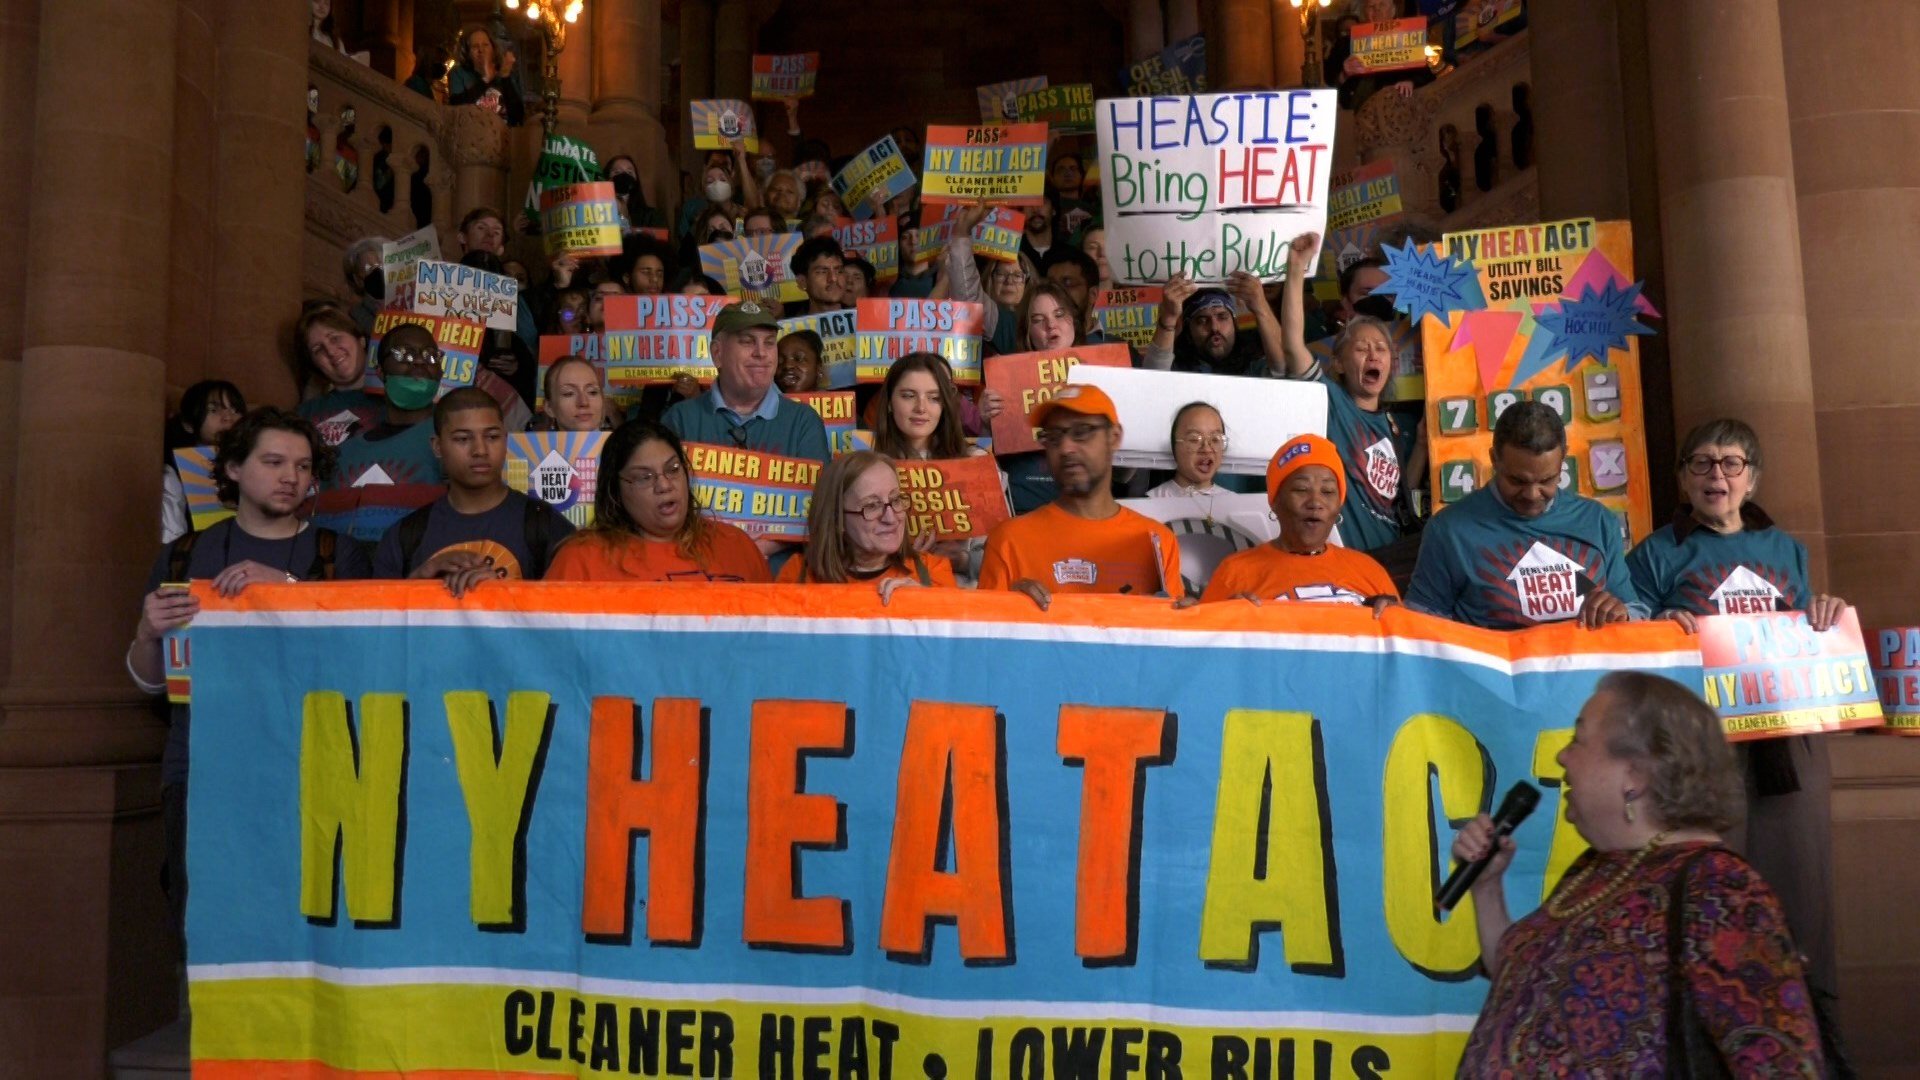 New York Heat Act makes way into state budget process